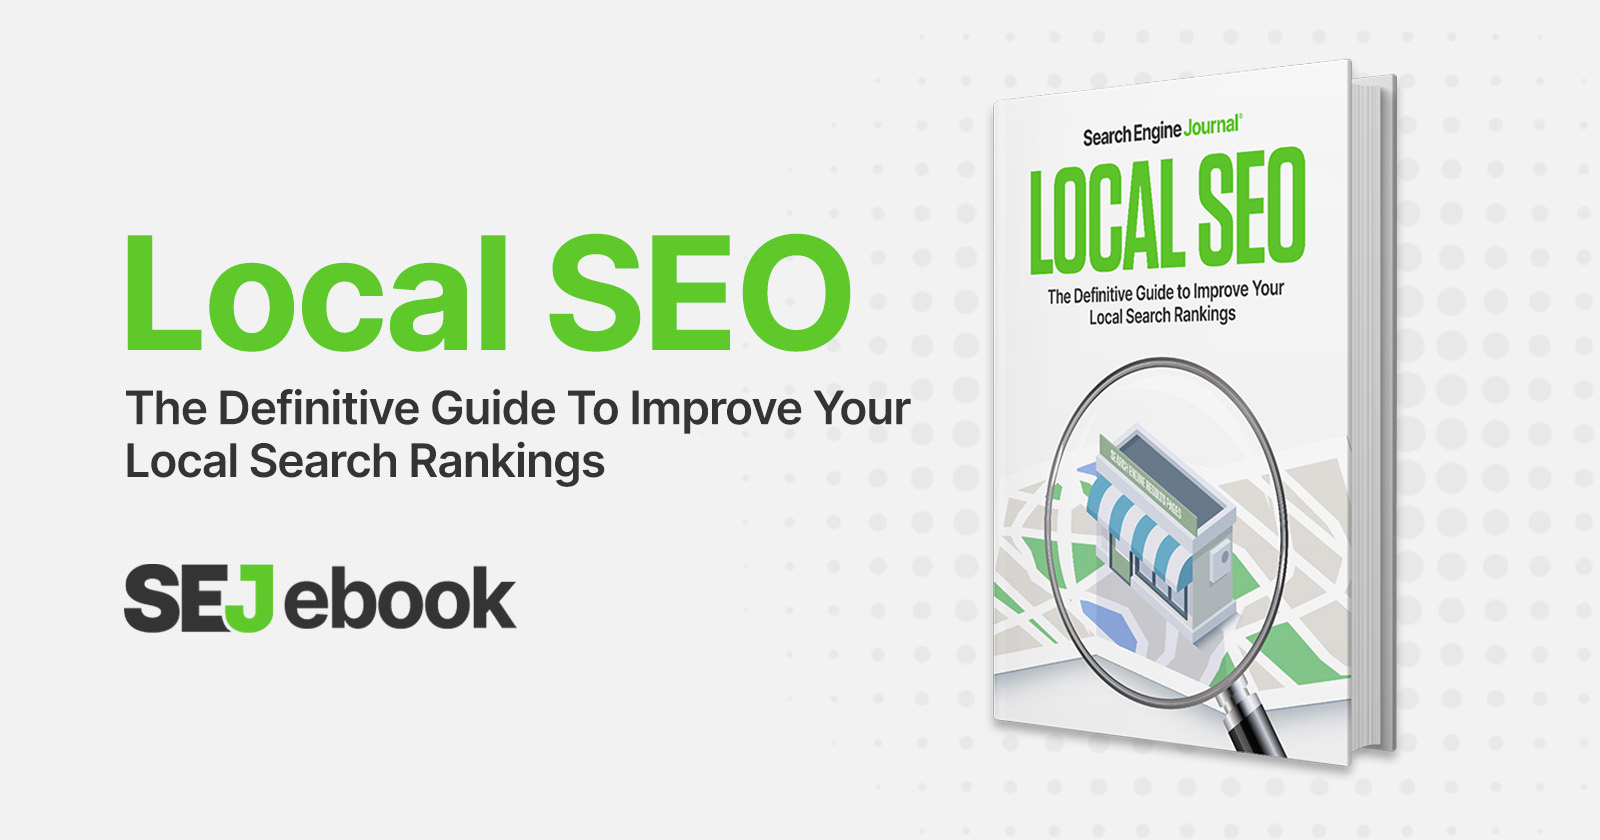 The Definitive Guide To Improve Your Local Search Rankings